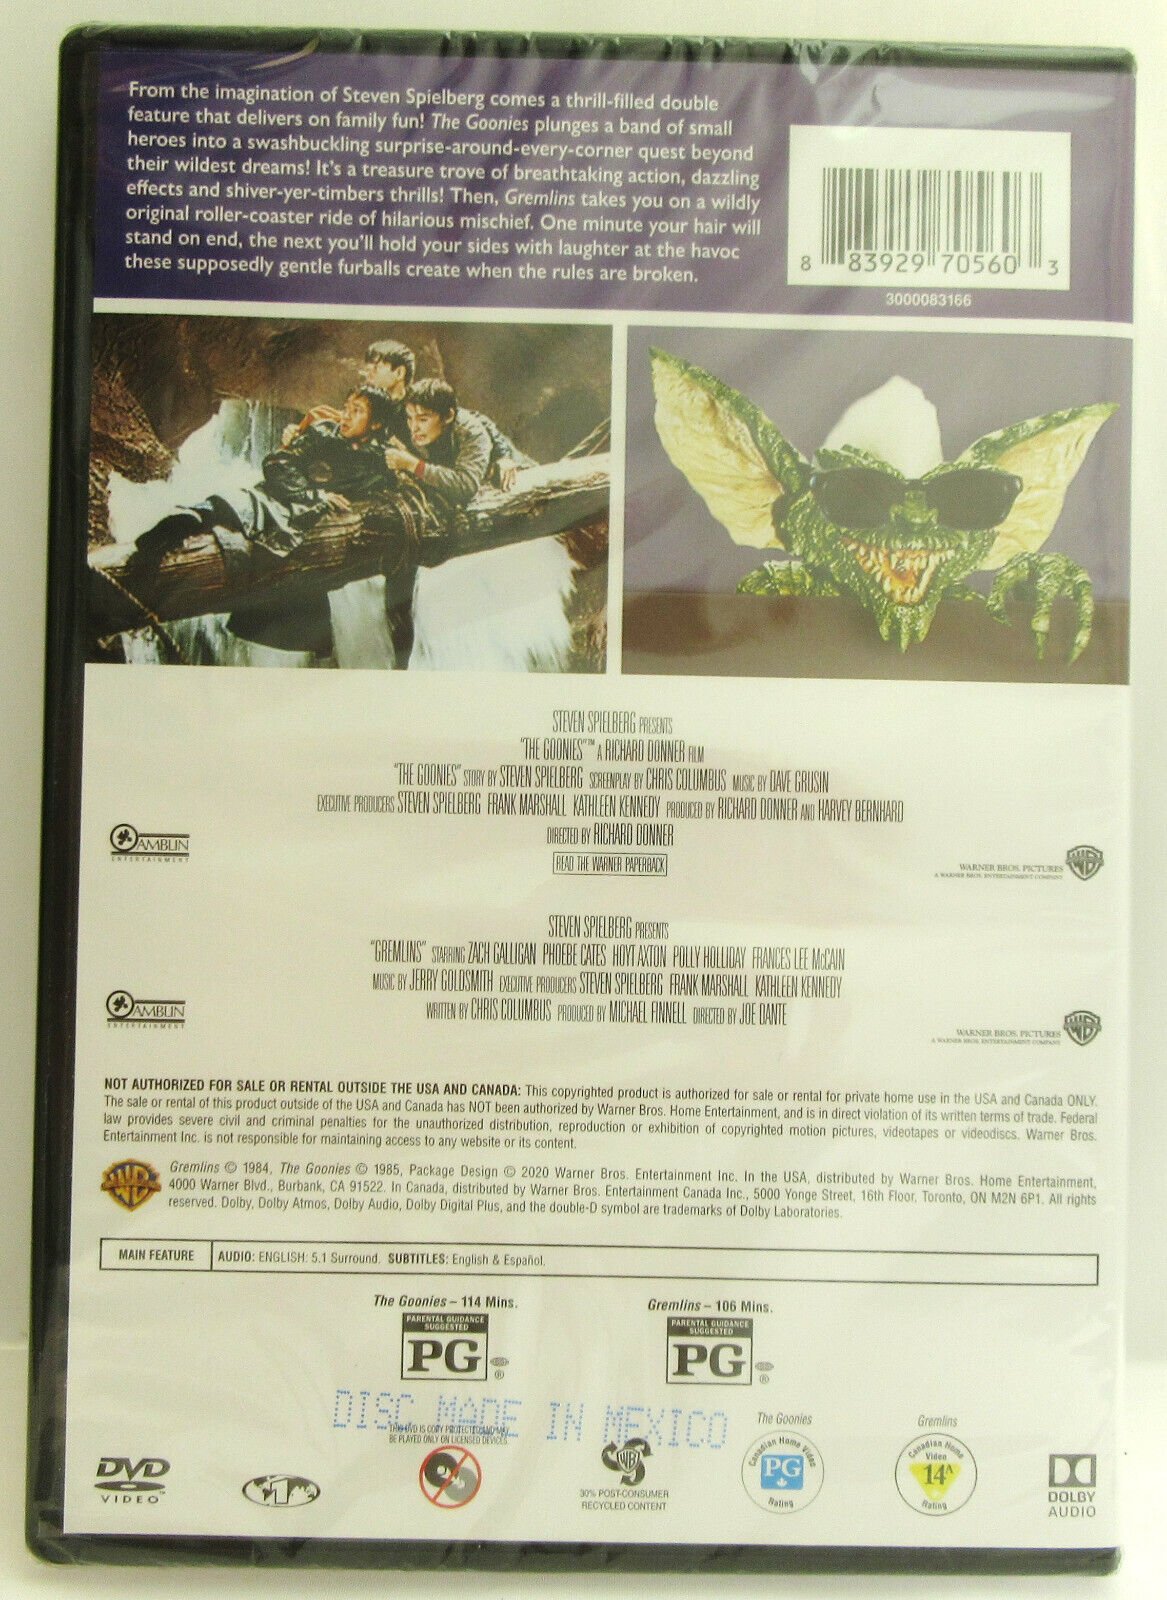 The Goonies & Gremlins ~ 2-Film Collection ~ Movie ~ New DVD